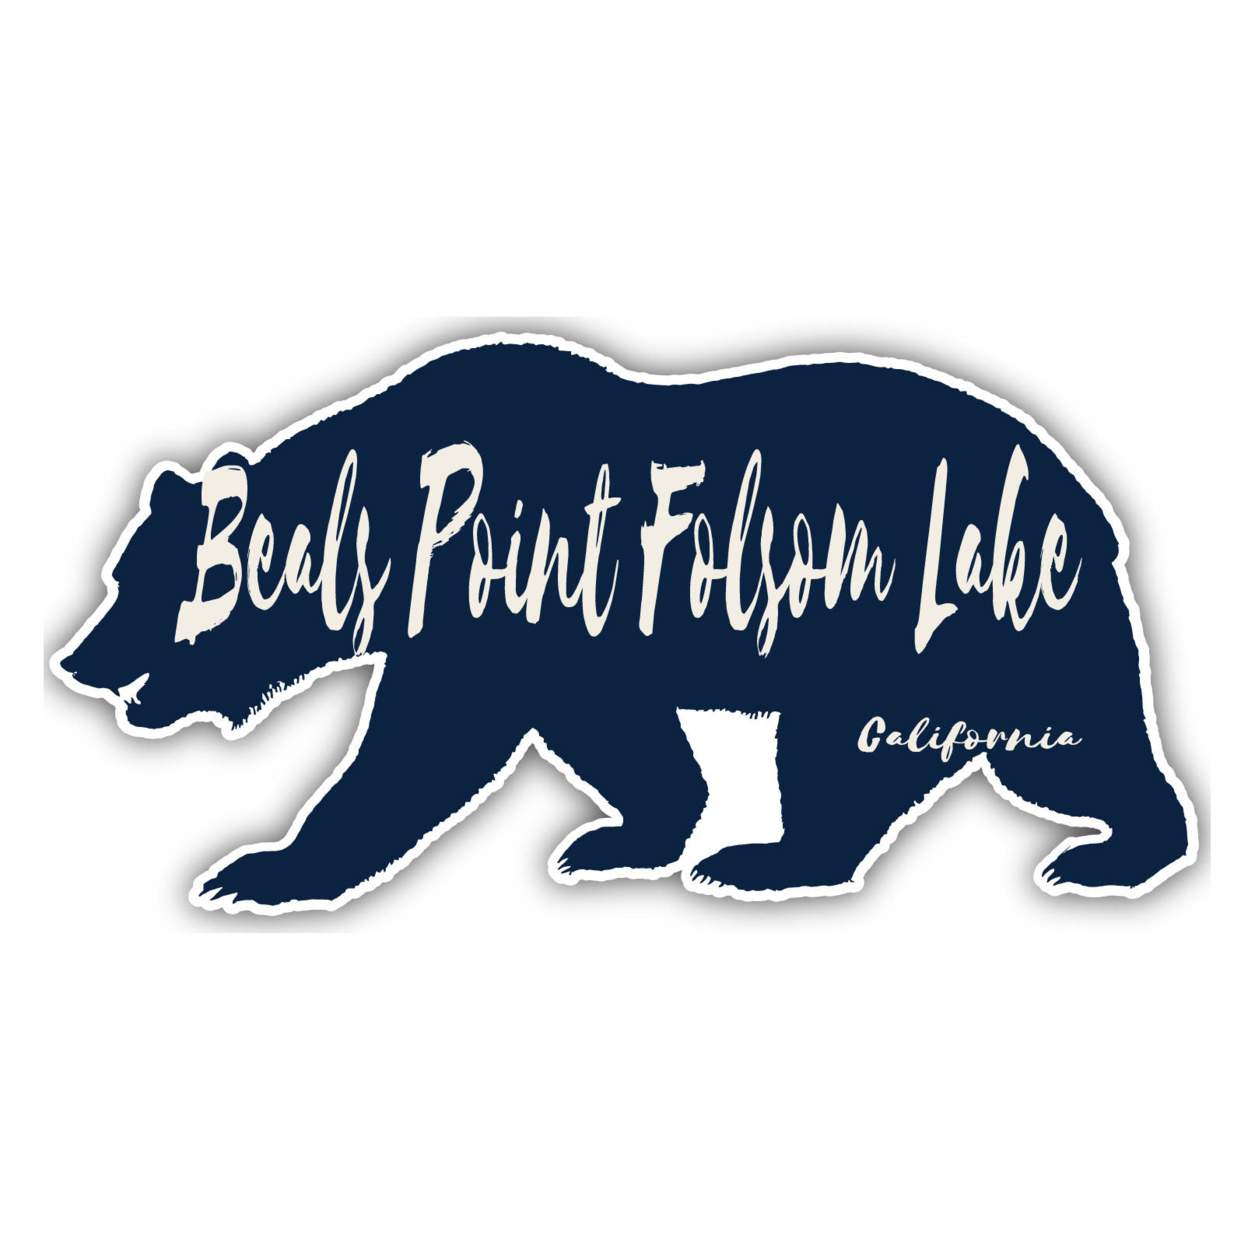 Beals Point Folsom Lake California Souvenir Decorative Stickers (Choose Theme And Size) - 4-Pack, 10-Inch, Tent